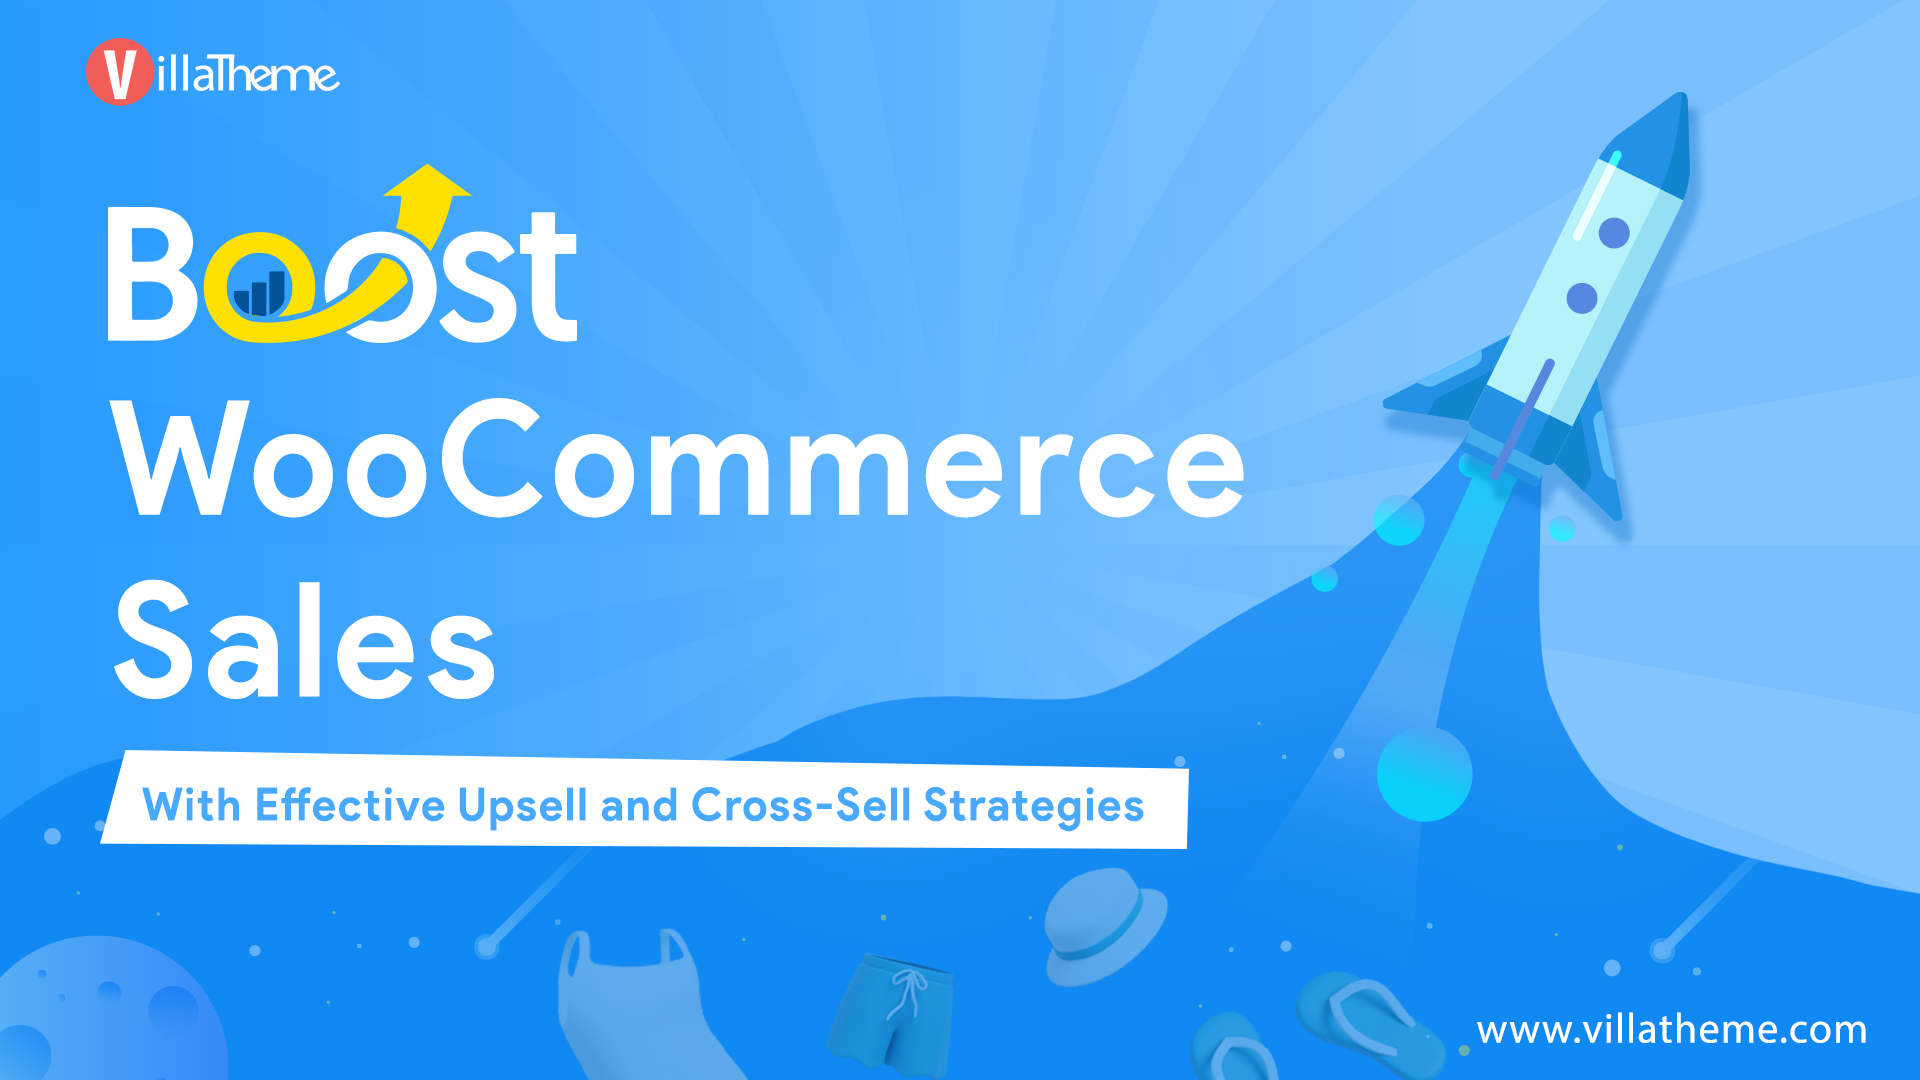 Effective Upsell and Cross-sell Strategies